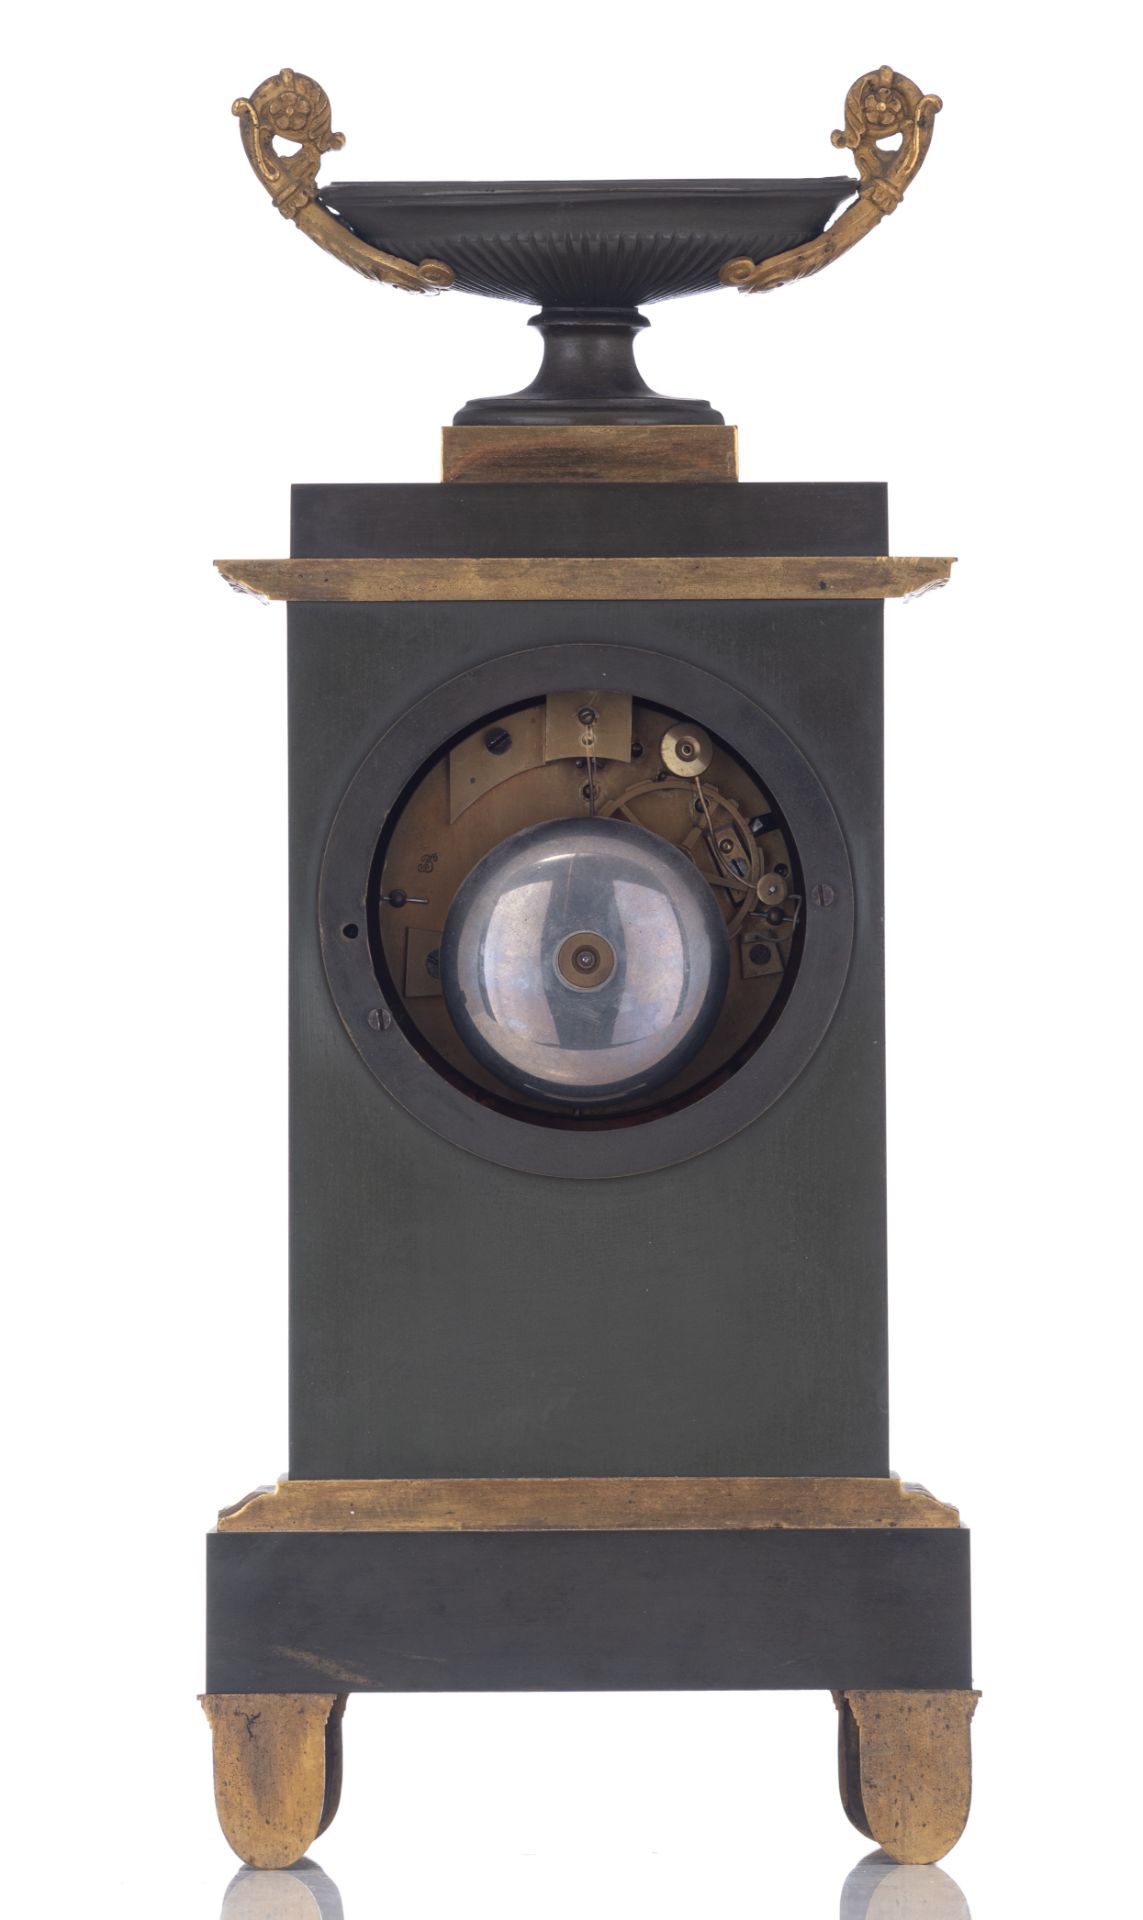 A fine Empire patinated and gilt bronze table clock, 'J.B. Hanset, Bruxelles', H 38 cm - Image 3 of 11